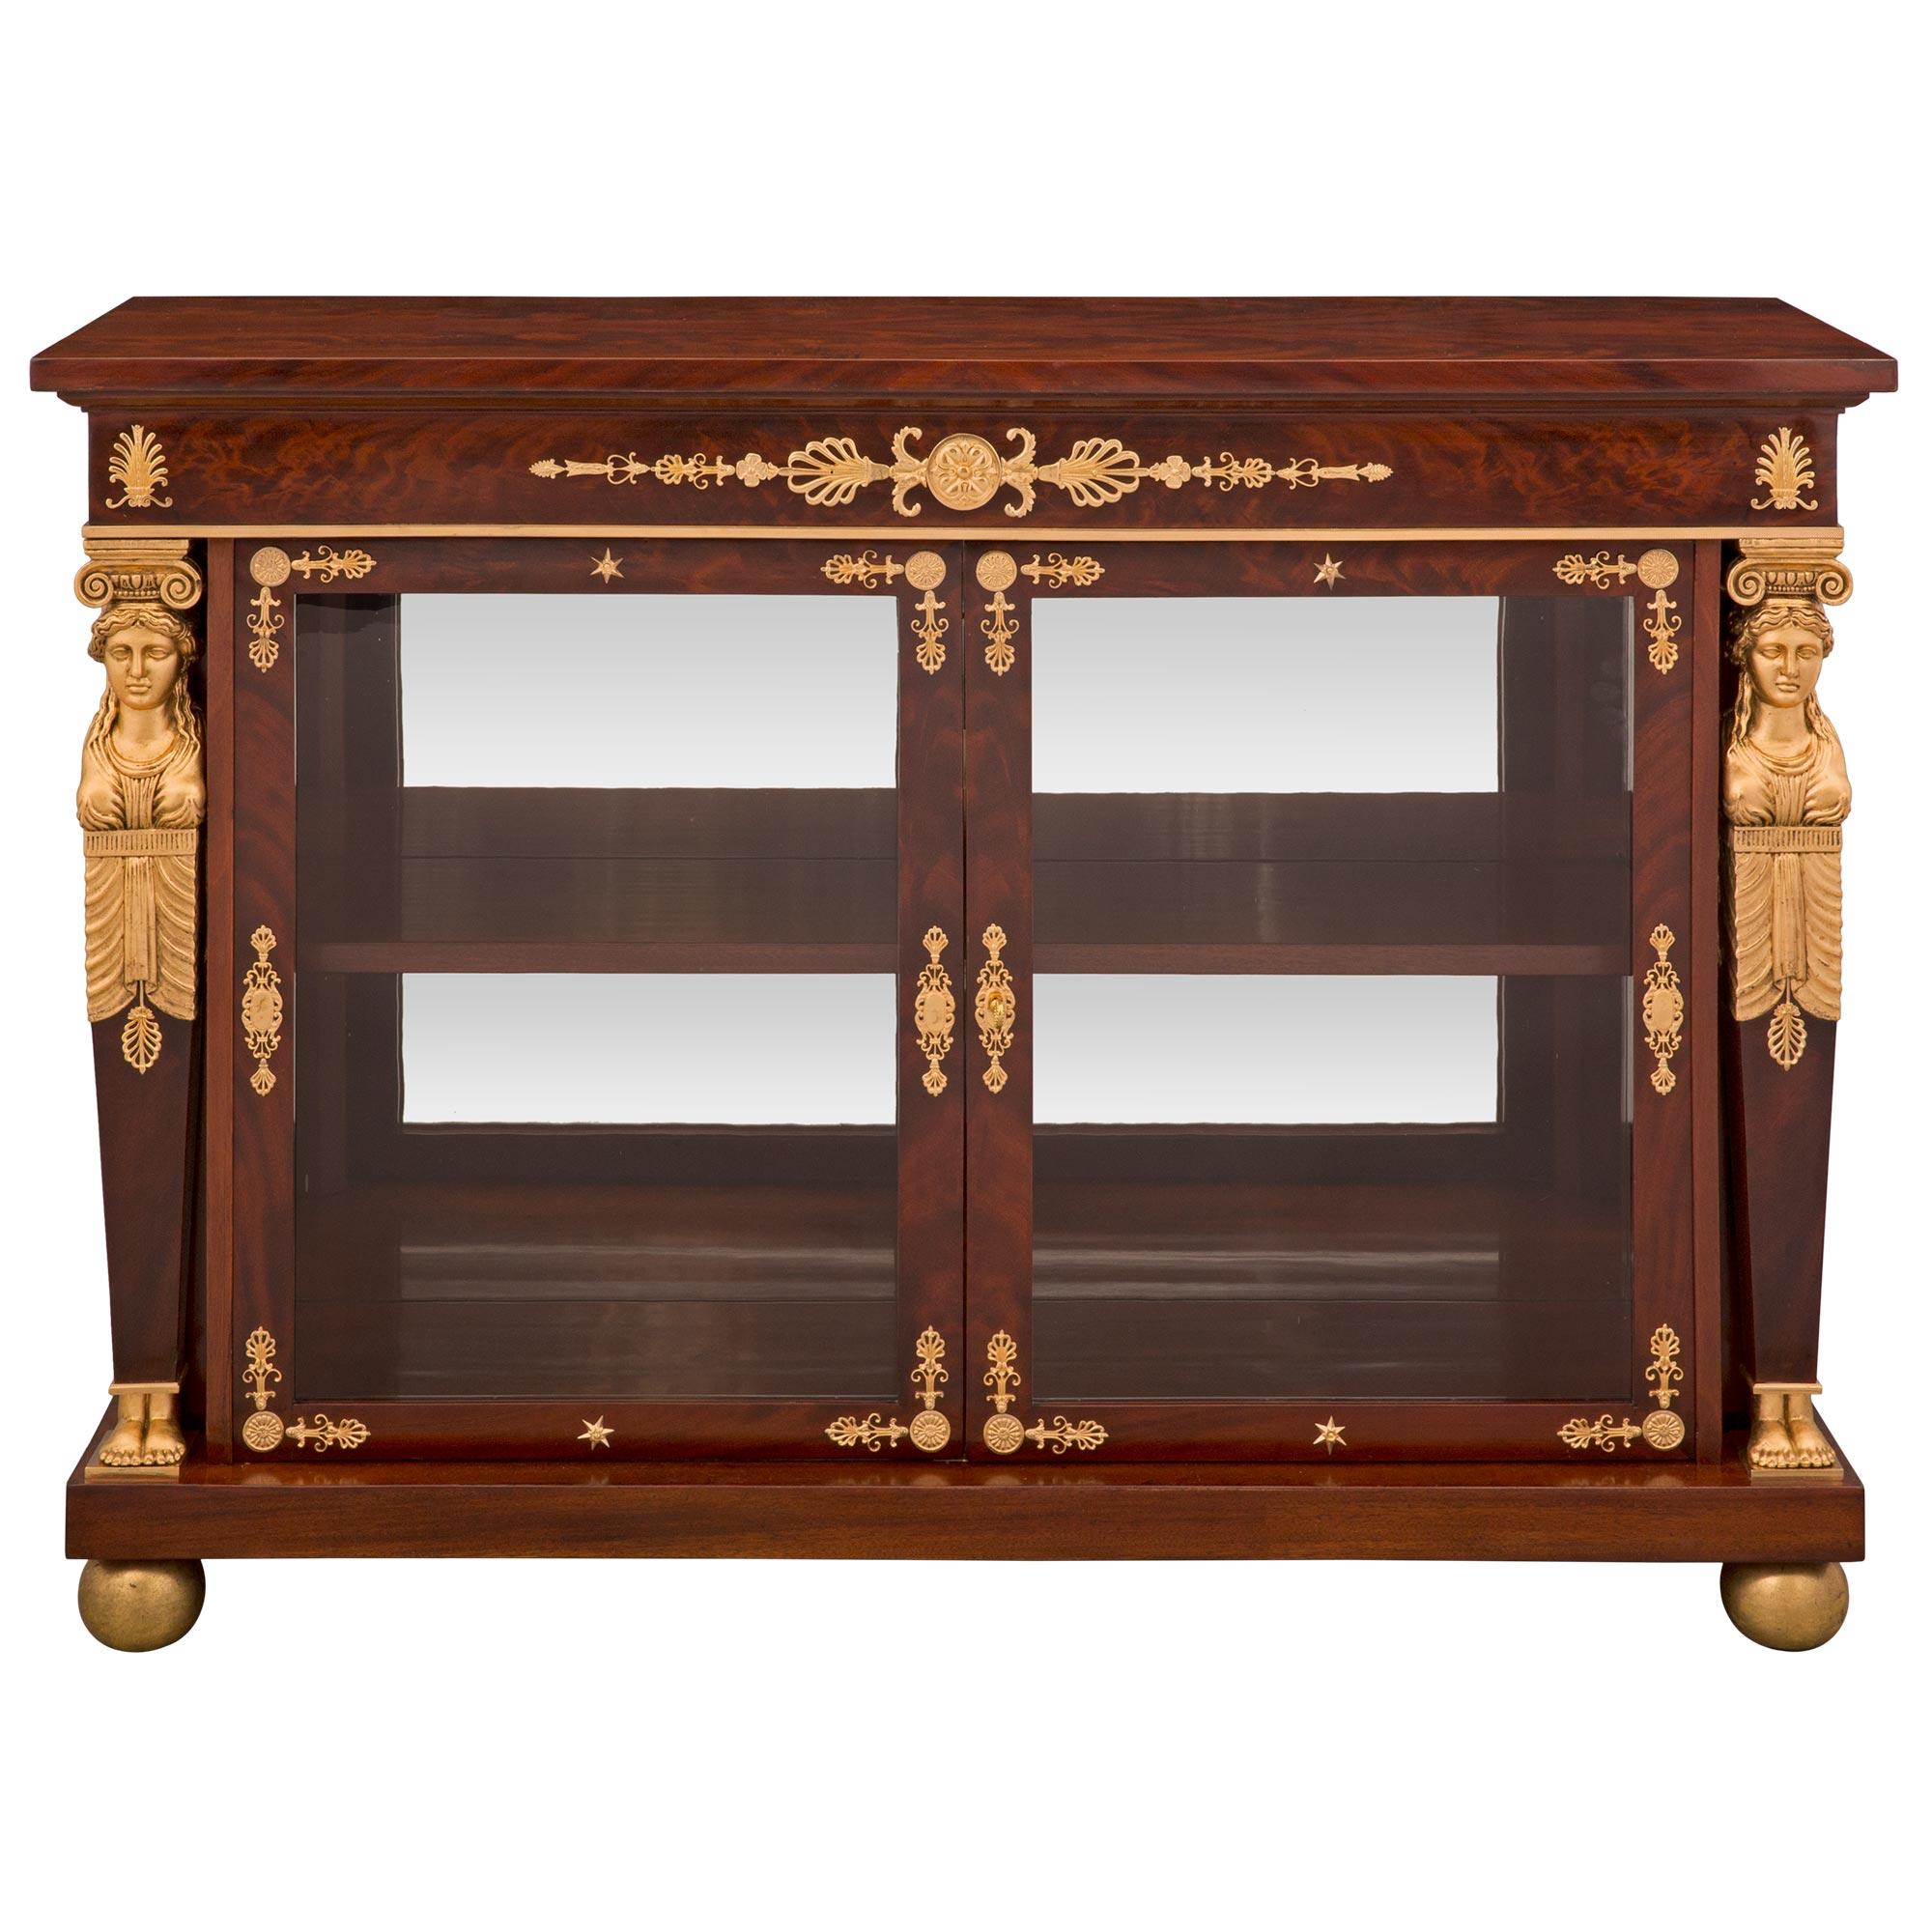 French 19th Century 1st Empire Period Mahogany, Ormolu, and Giltwood Vitrine For Sale